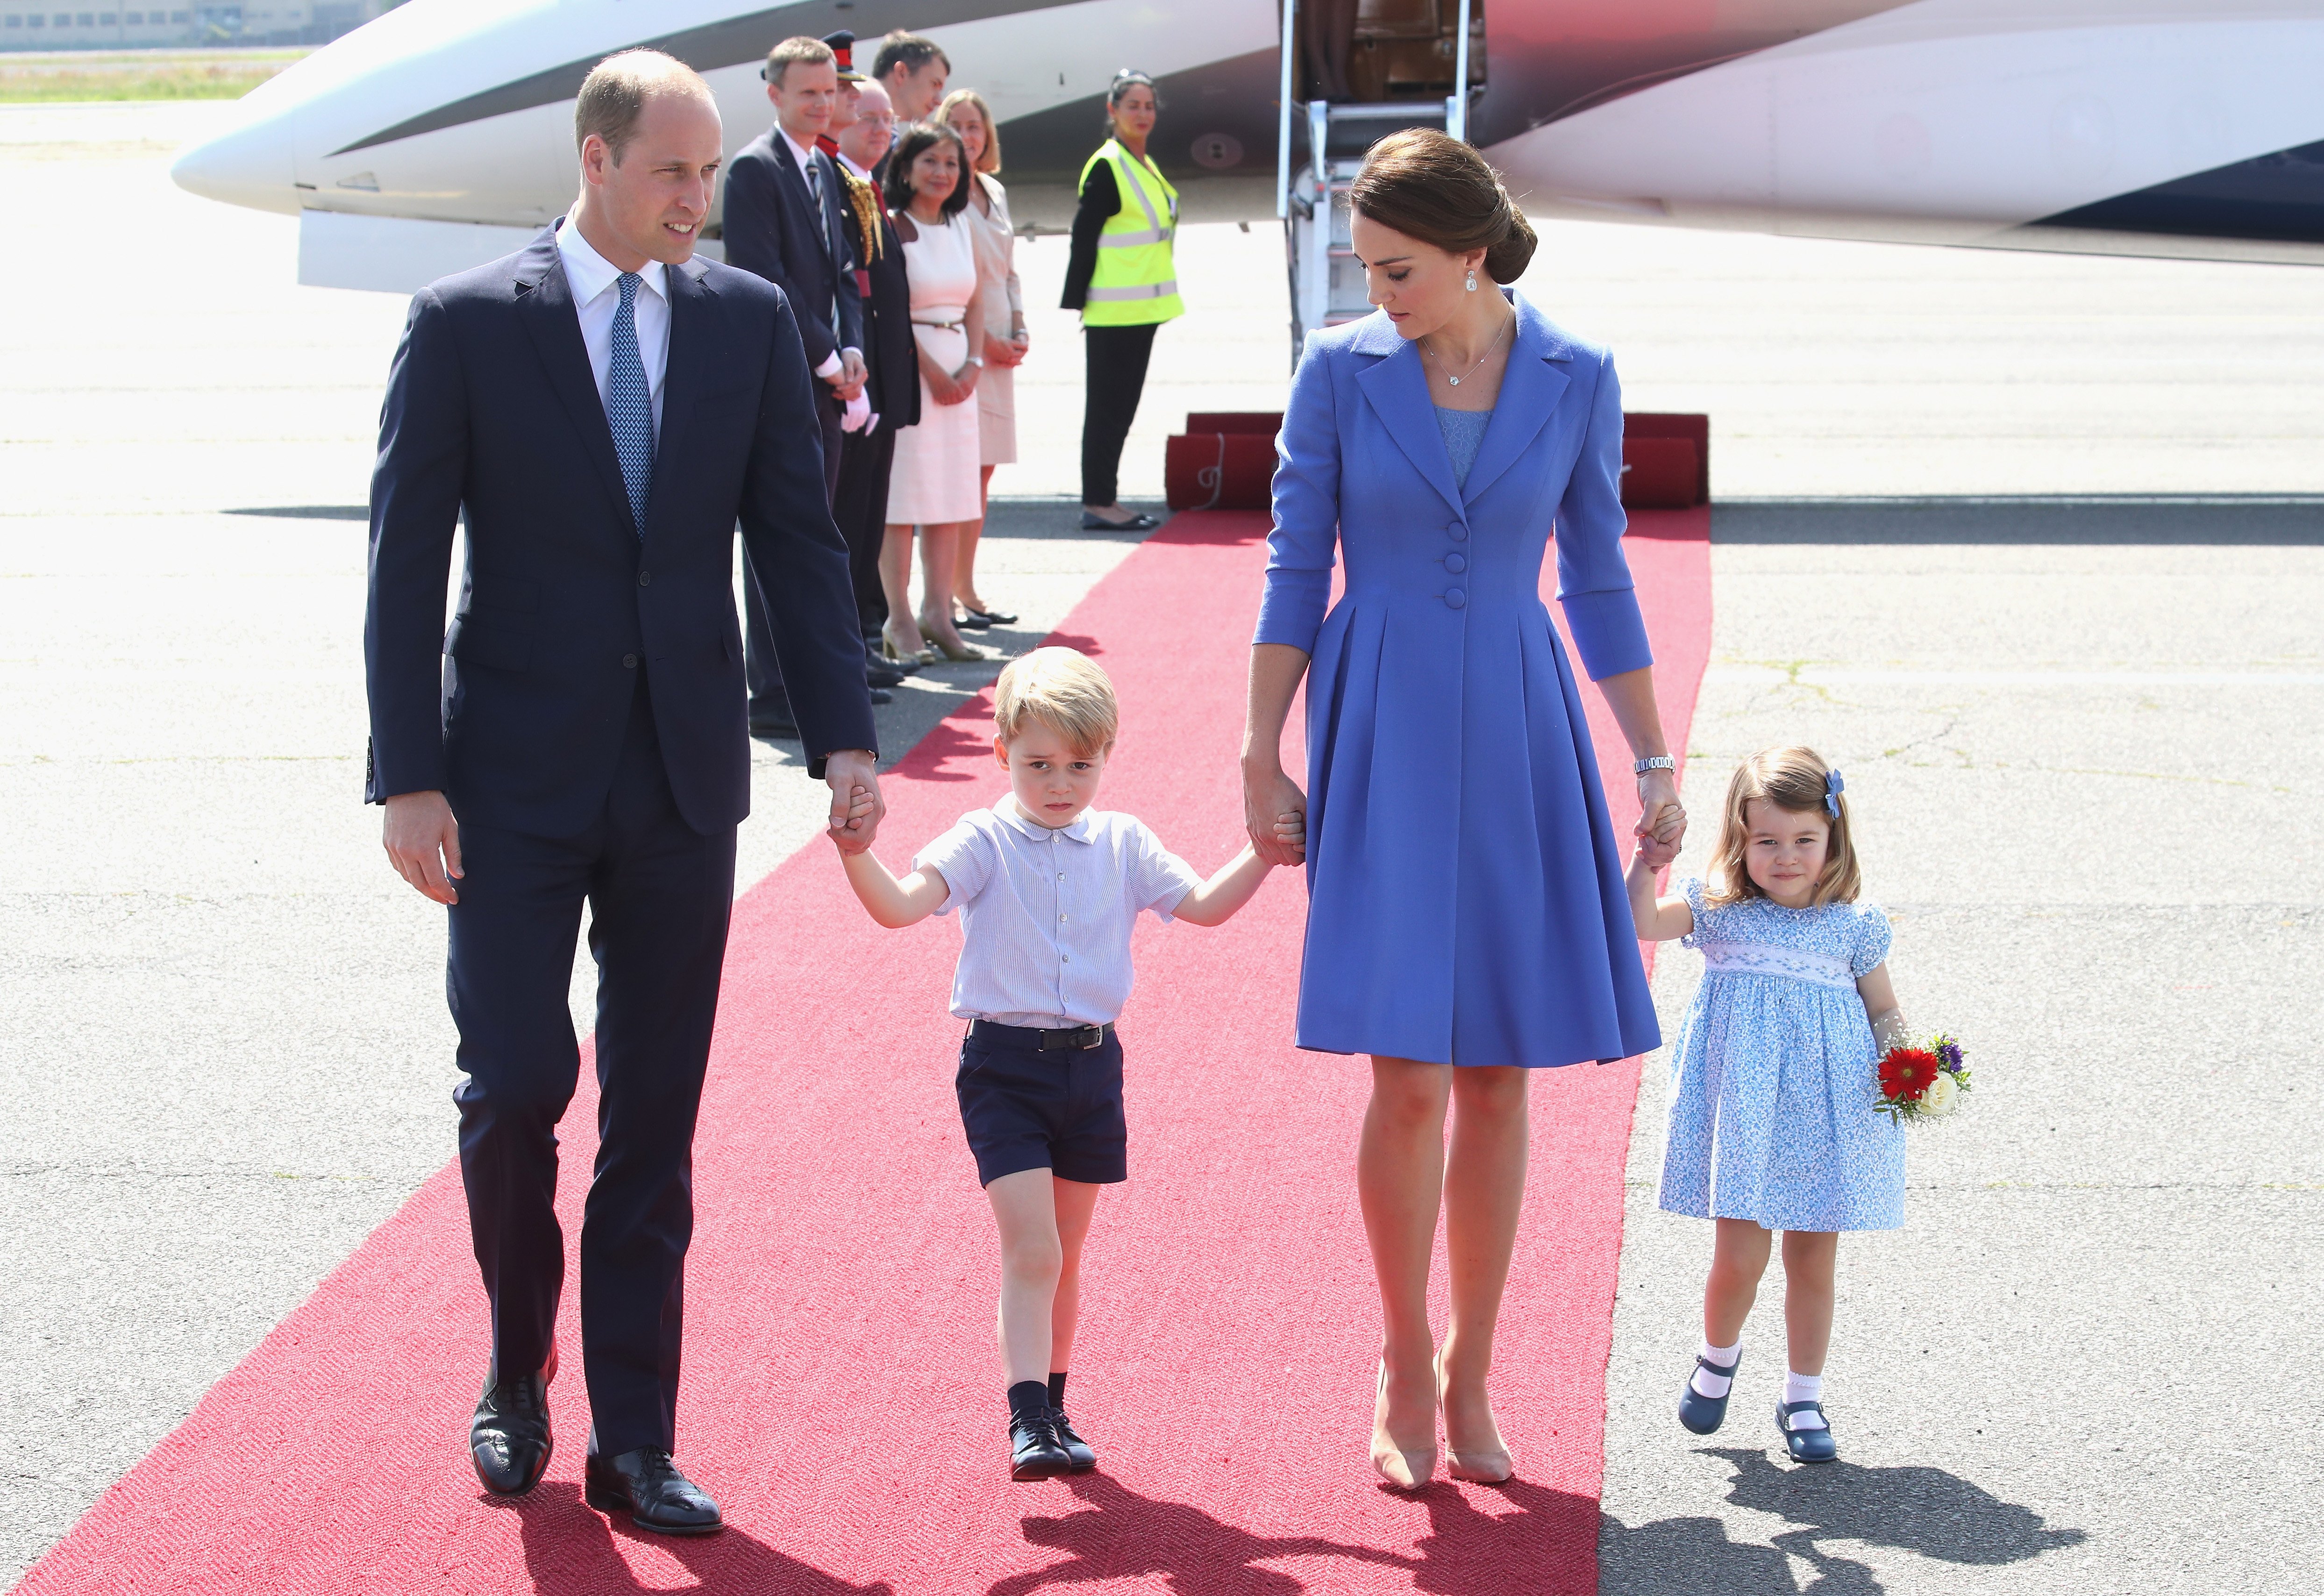 Prince William, Duke of Cambridge, Catherine, Duchess of Cambridge, Prince George of Cambridge and Princess Charlotte of Cambridge arrive at Berlin Tegel Airport during an official visit to Poland and Germany on July 19, 2017 in Berlin, Germany | Photo: Getty Images